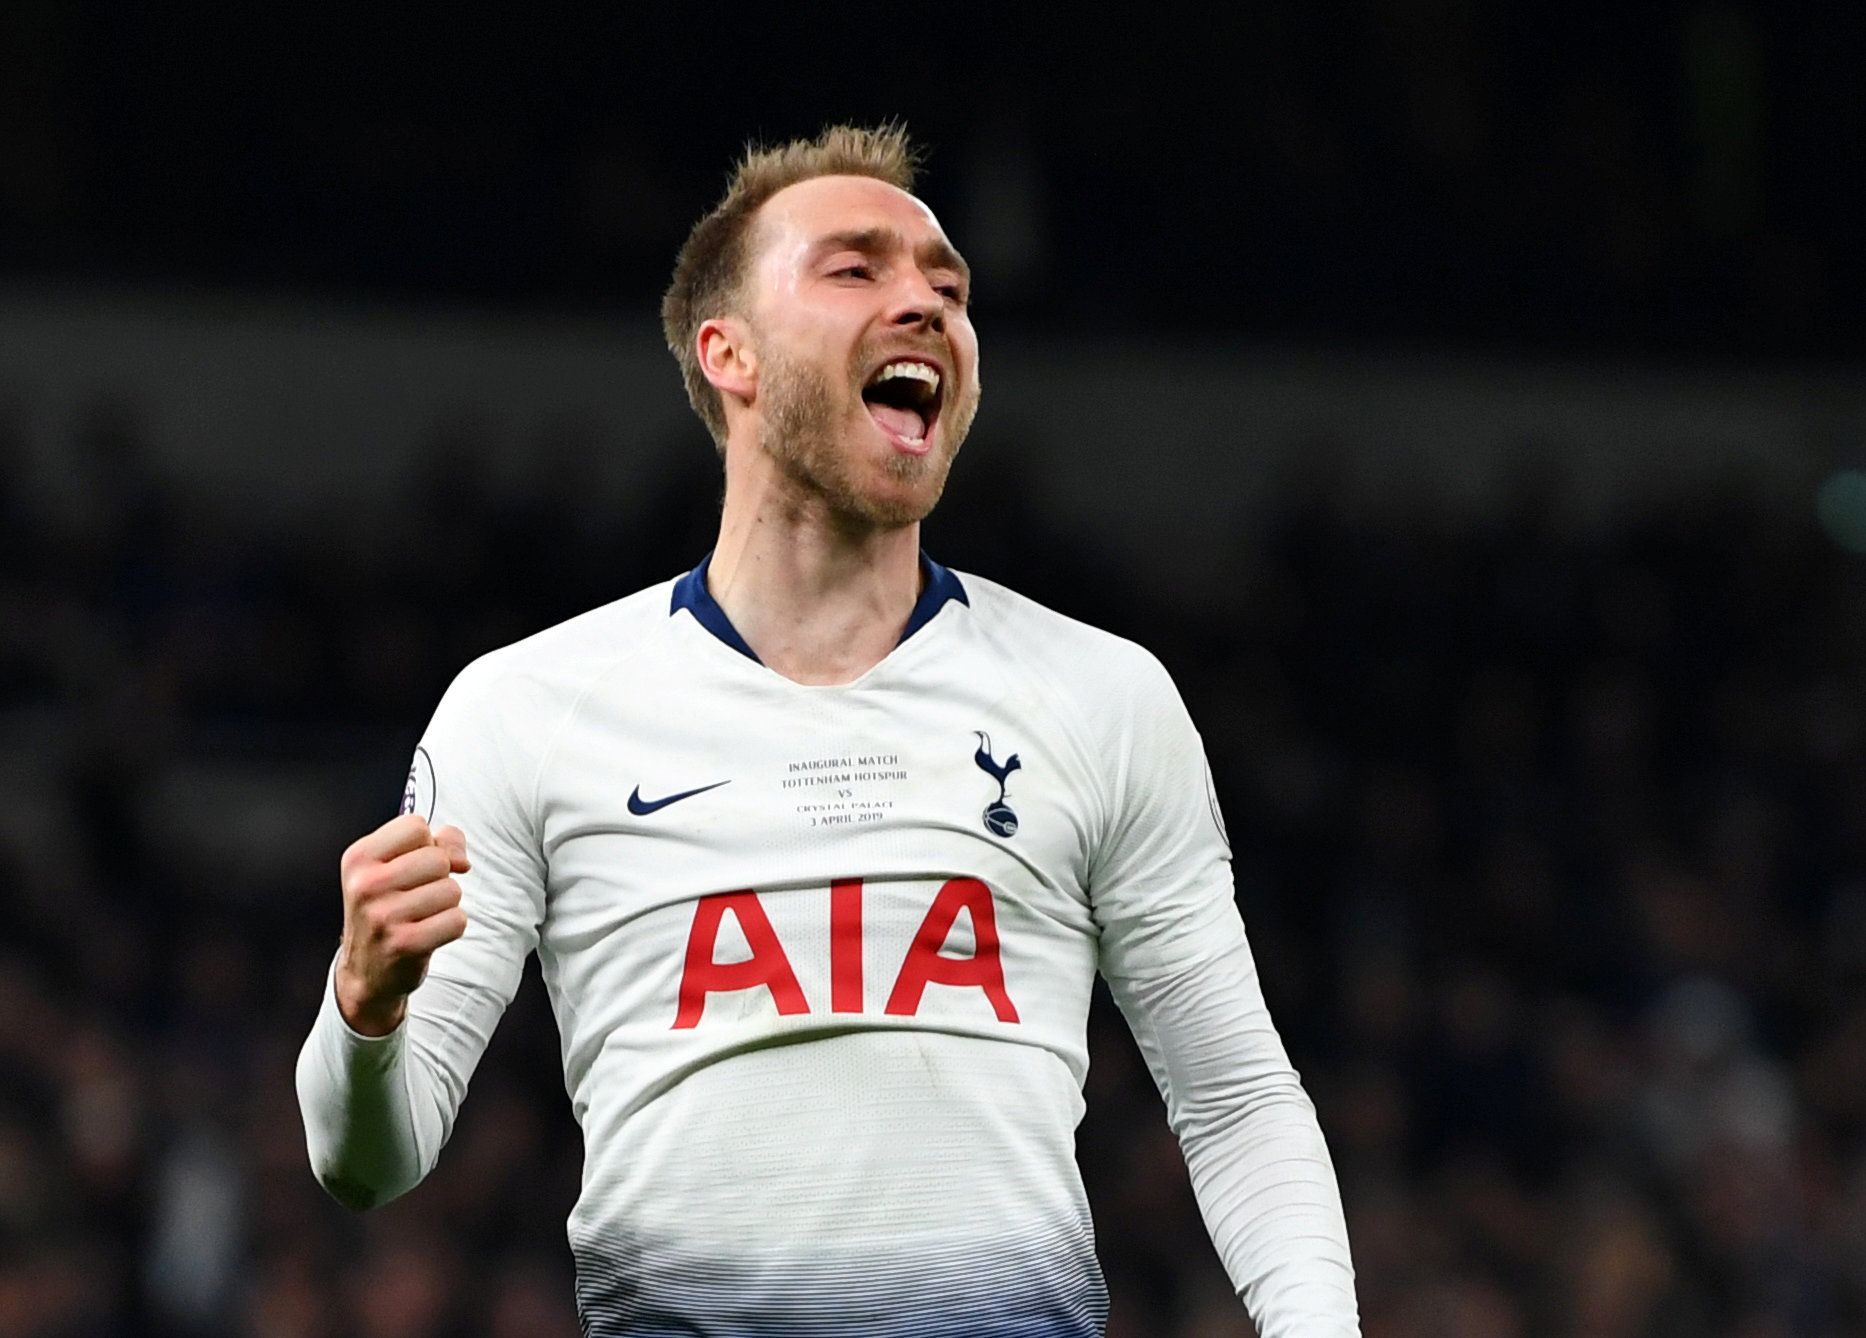 Soccer Football - Premier League - Tottenham Hotspur v Crystal Palace - Tottenham Hotspur Stadium, London, Britain - April 3, 2019  Tottenham's Christian Eriksen celebrates scoring their second goal                     REUTERS/Dylan Martinez  EDITORIAL USE ONLY. No use with unauthorized audio, video, data, fixture lists, club/league logos or "live" services. Online in-match use limited to 75 images, no video emulation. No use in betting, games or single club/league/player publications.  Please c